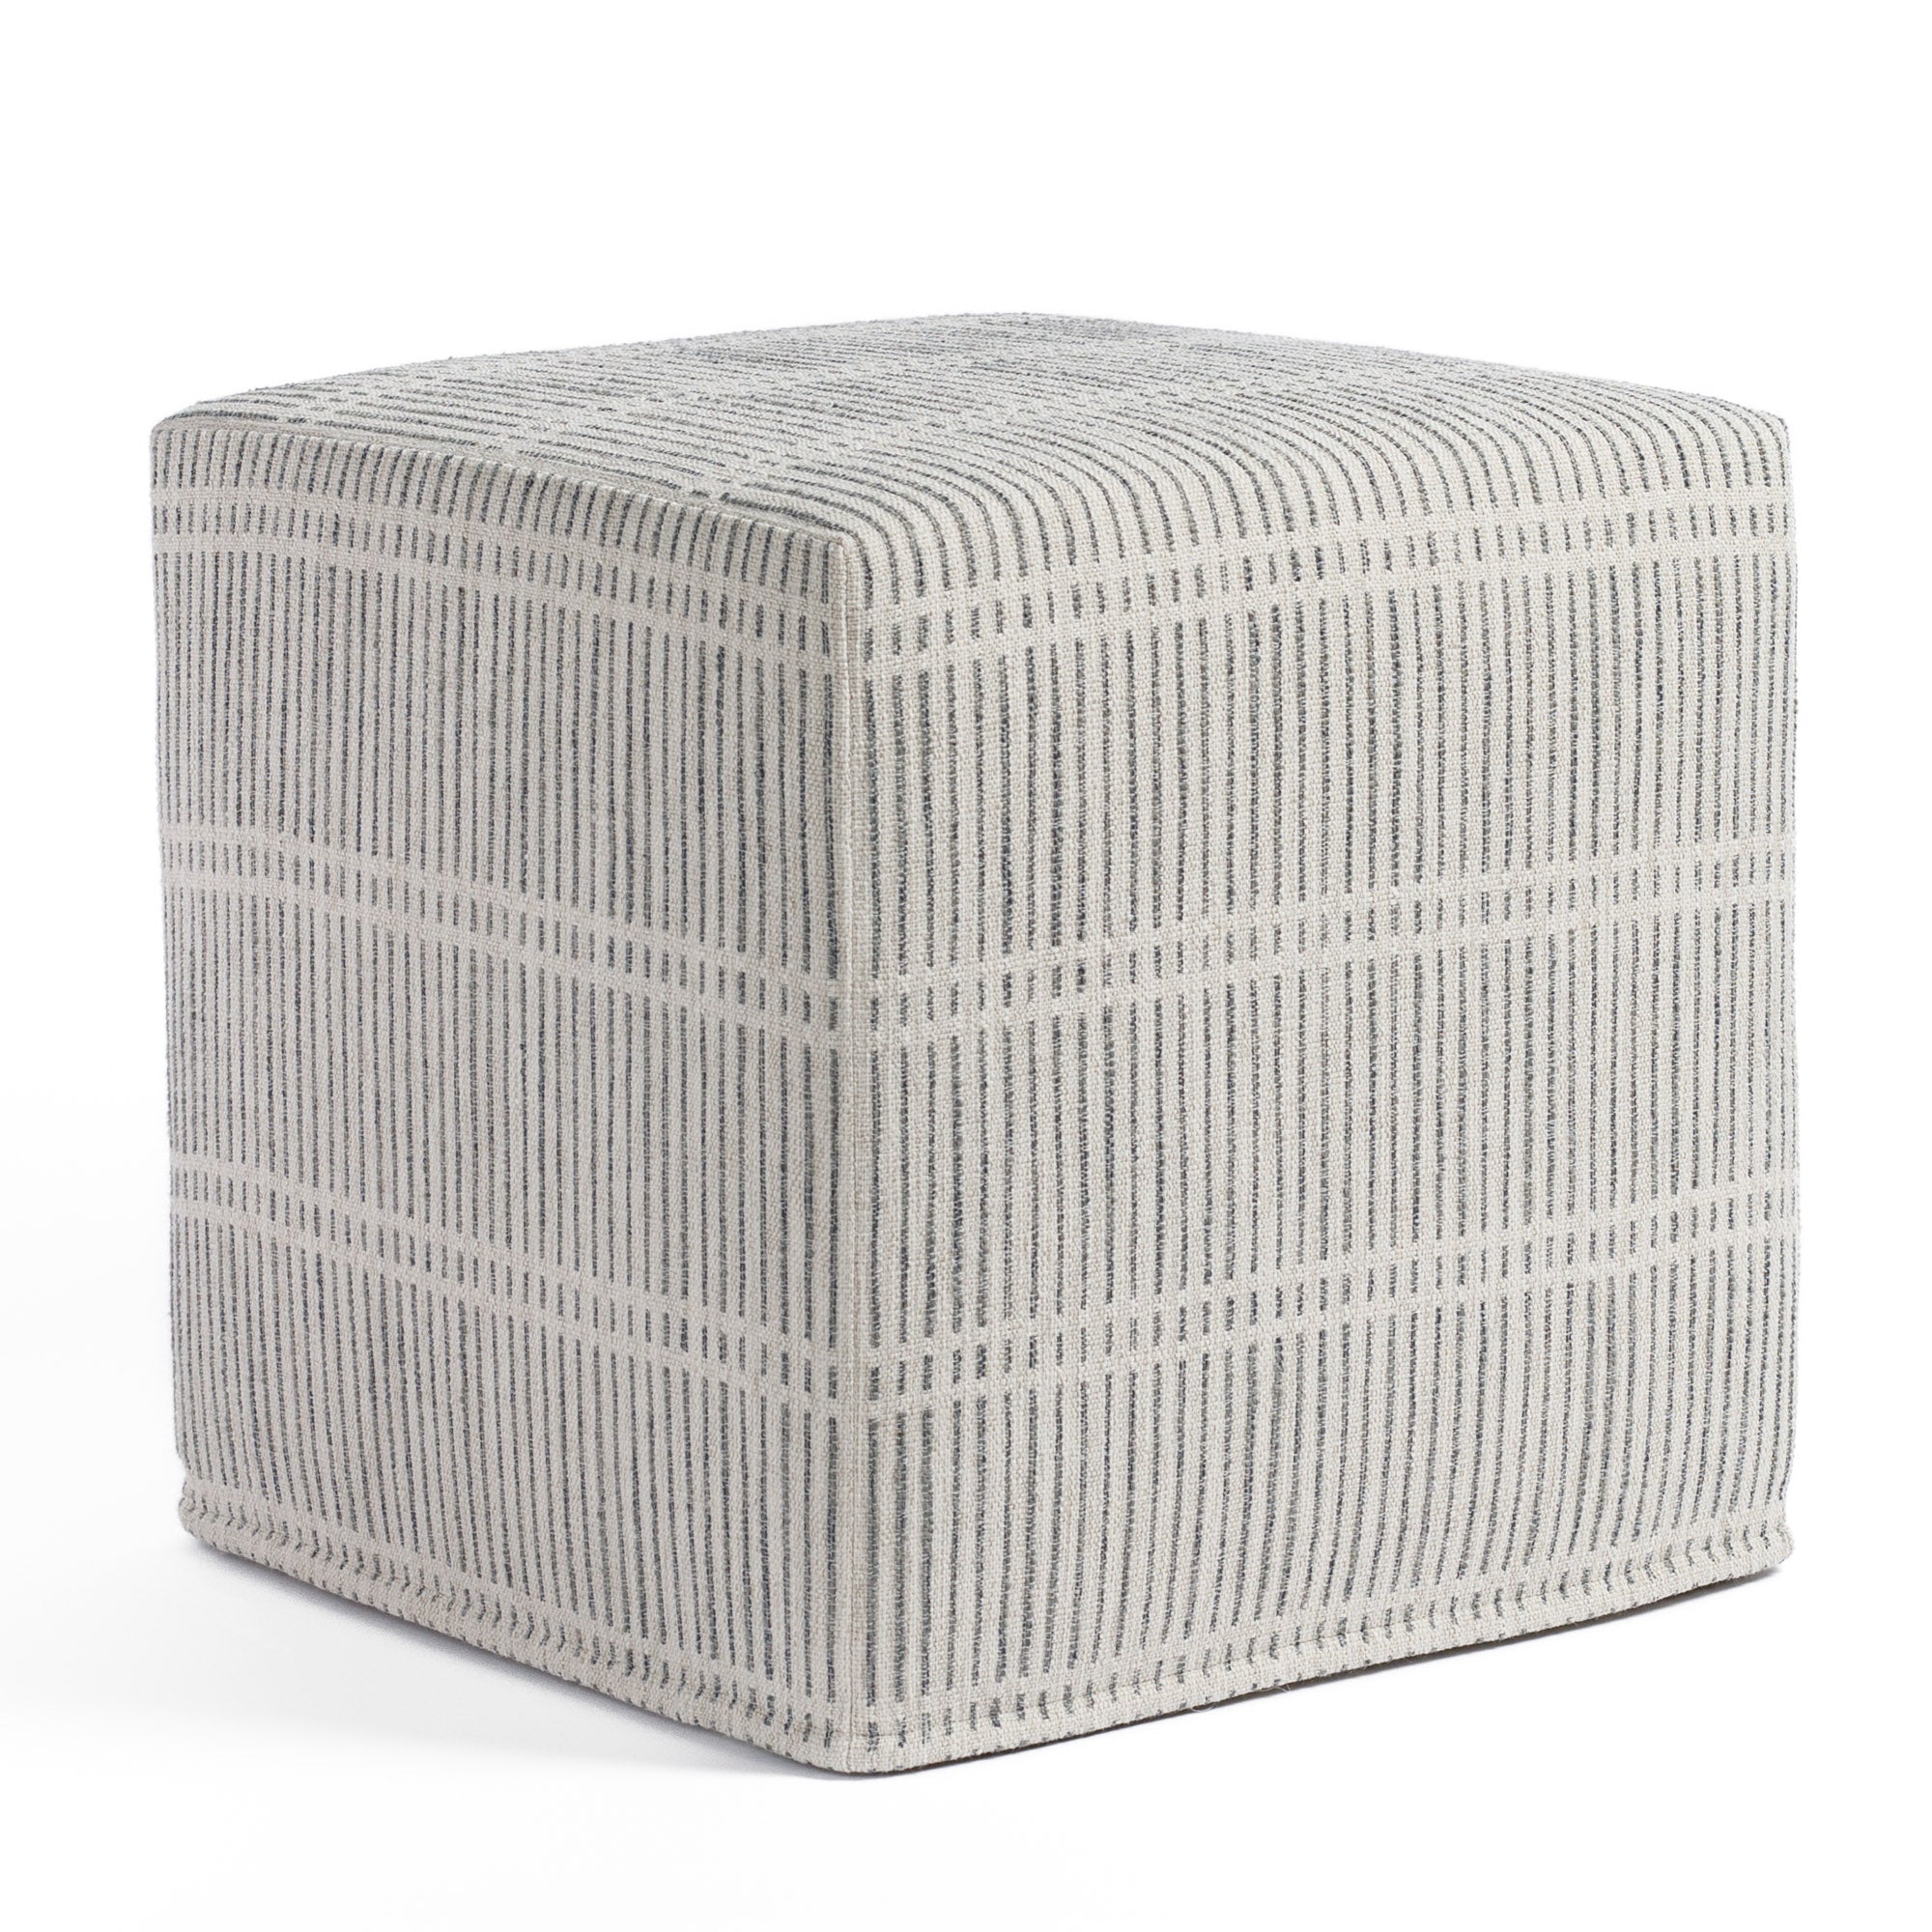 Carson Stripe 16x16 Cube Ottoman Stone Blue, a greige and blue dash stripe fabric cube ottoman from Tonic Living